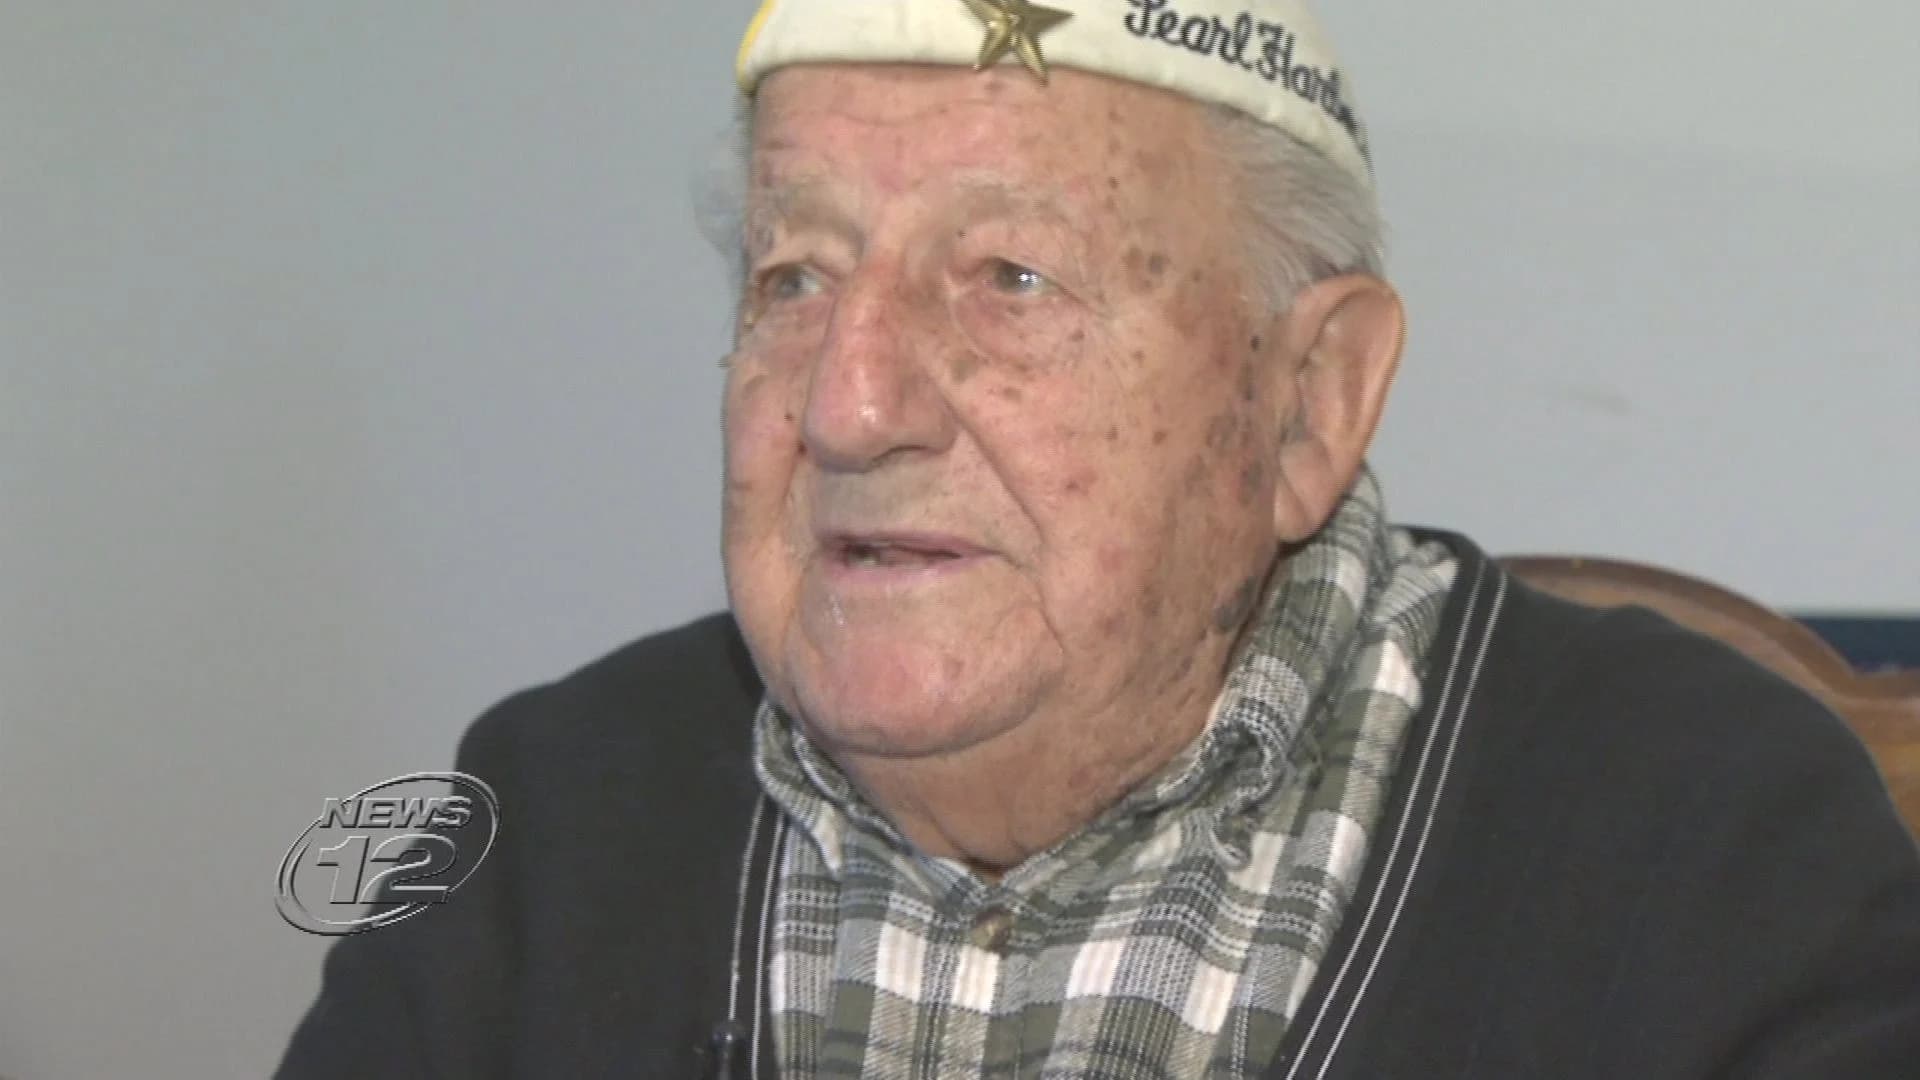 WWII vet receives county honors